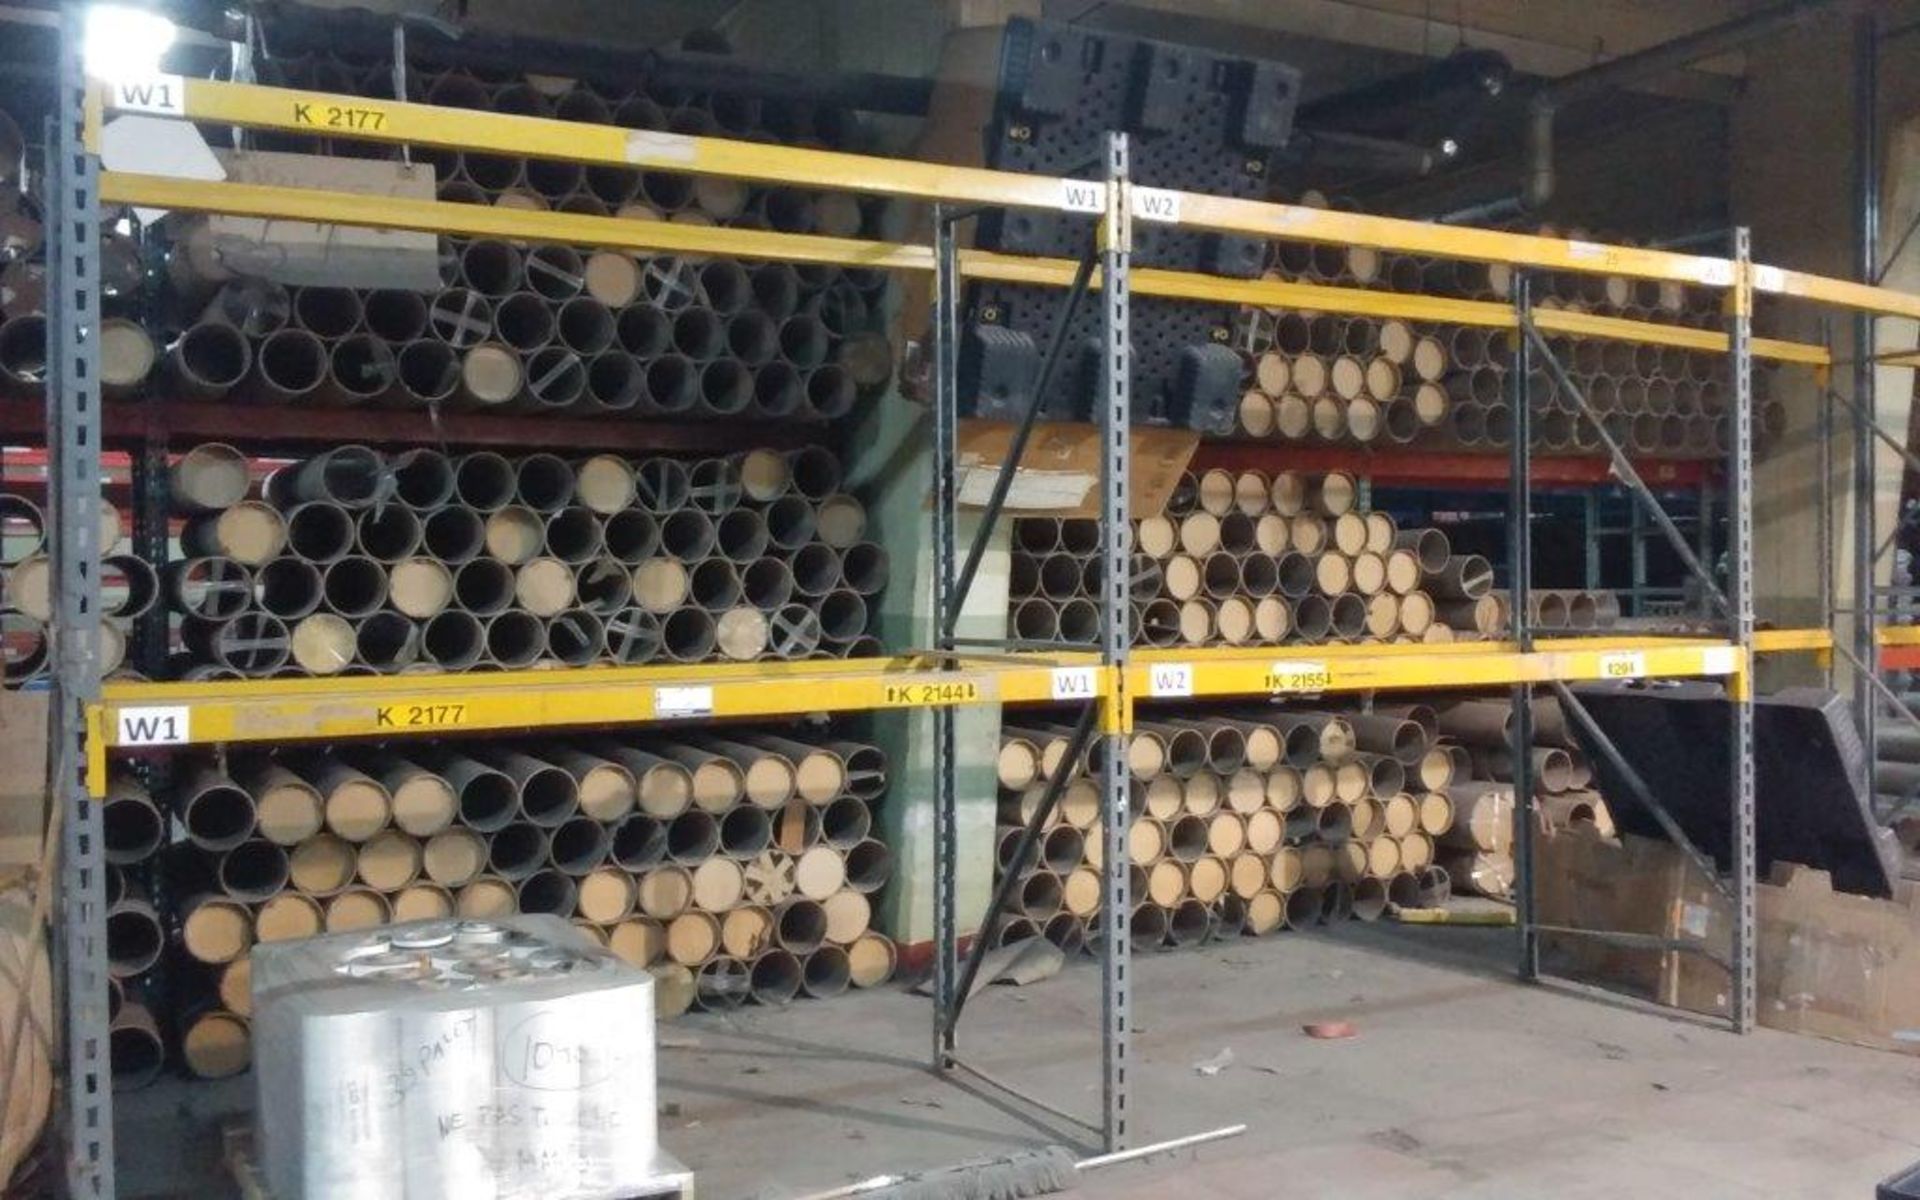 racking -3 sections, 4 uprights (42"), 12 crossbeams (8x3½")